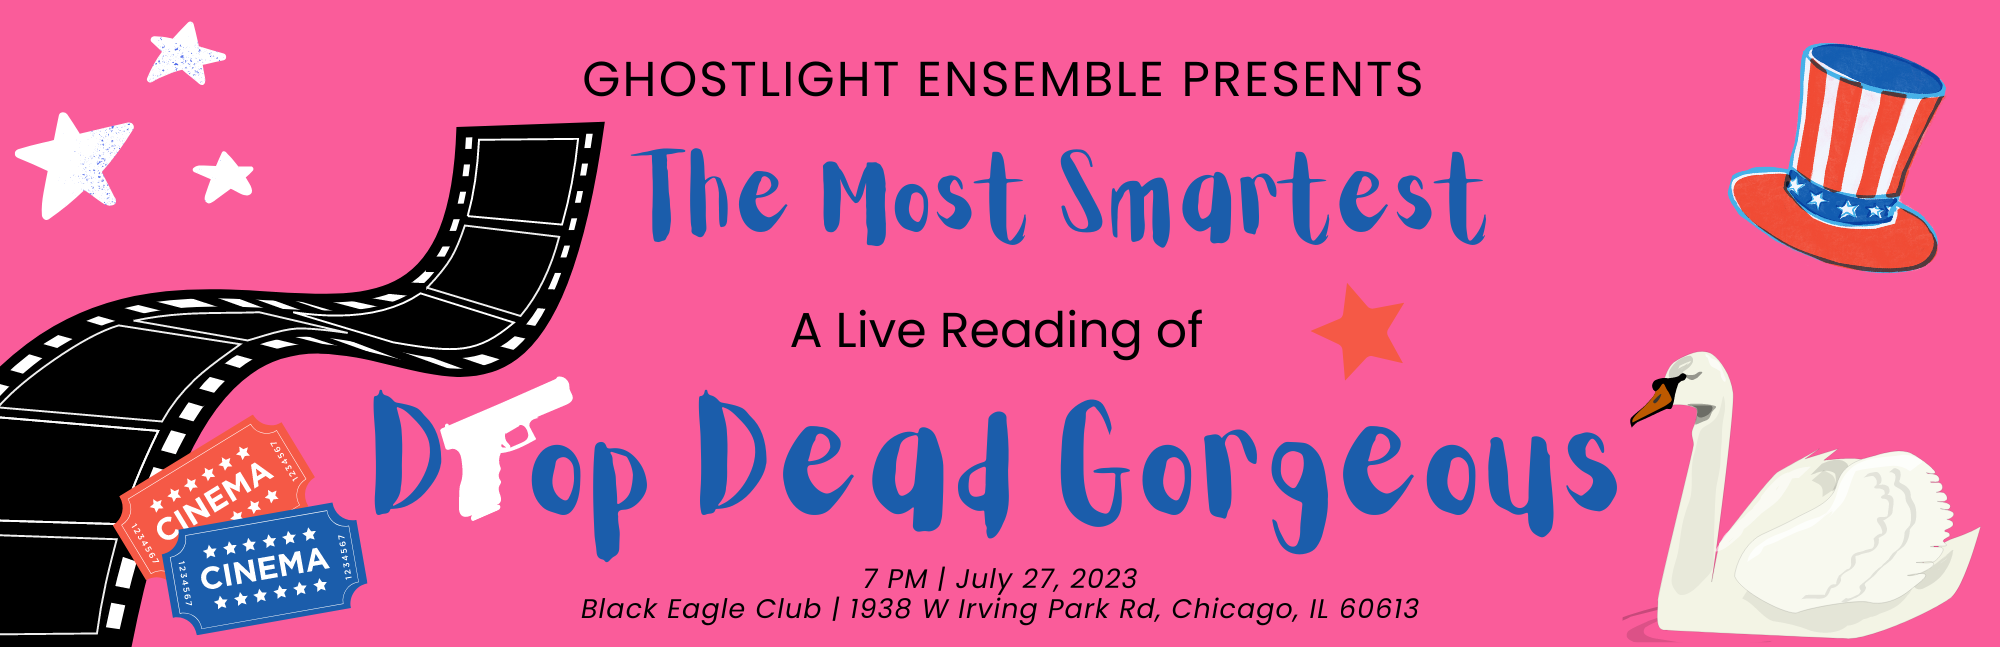 The Most Smartest: A Live Reading of Drop Dead Gorgeous